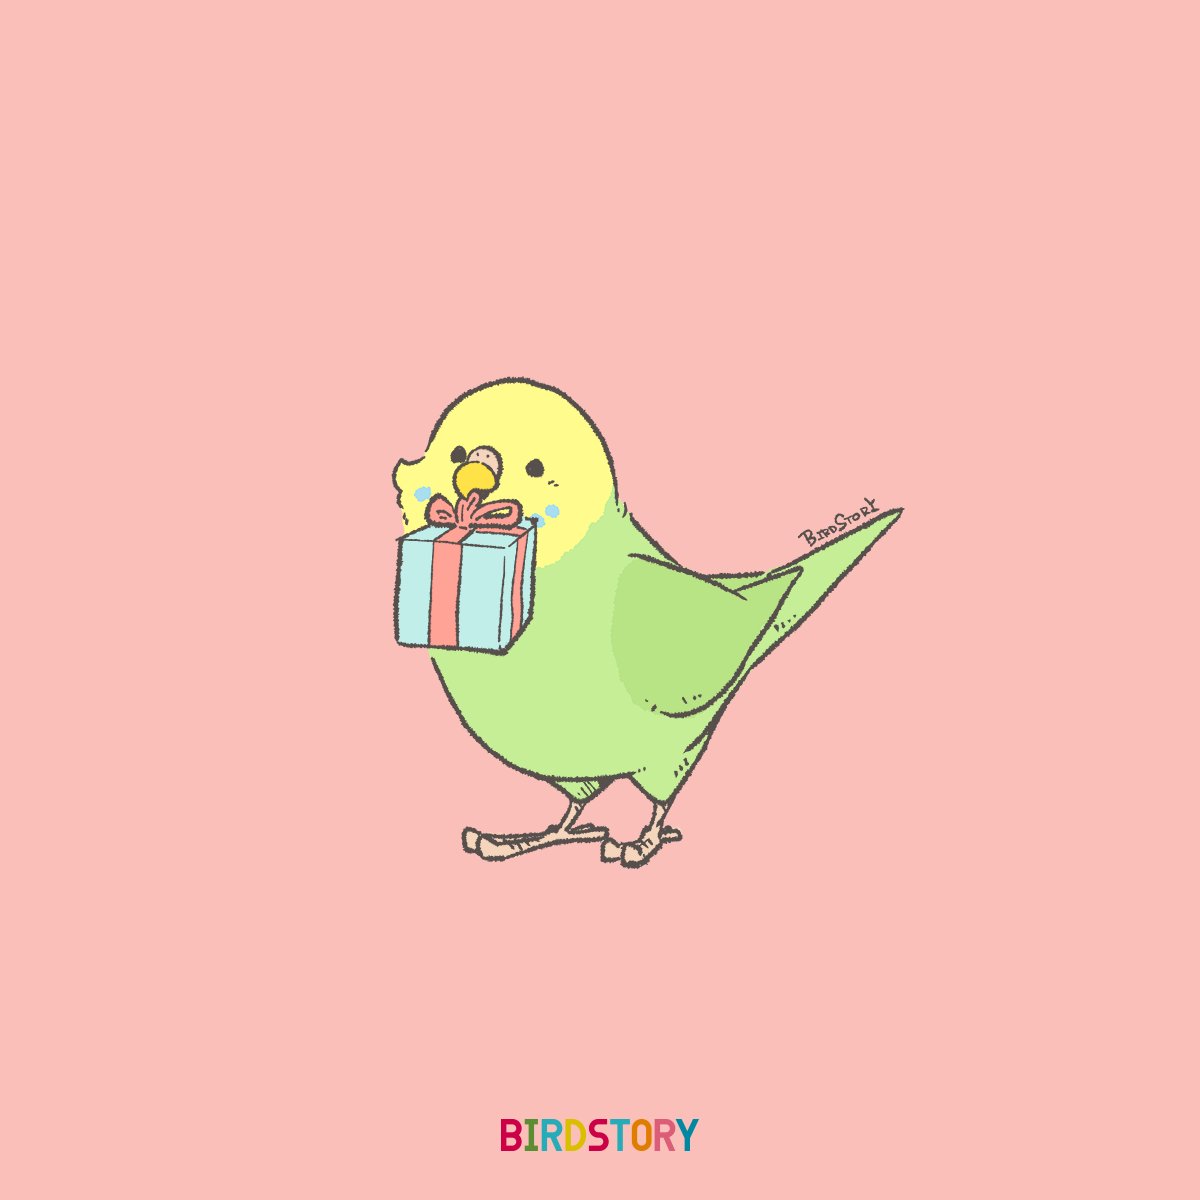 bird gift no humans animal focus simple background pink background gift box  illustration images